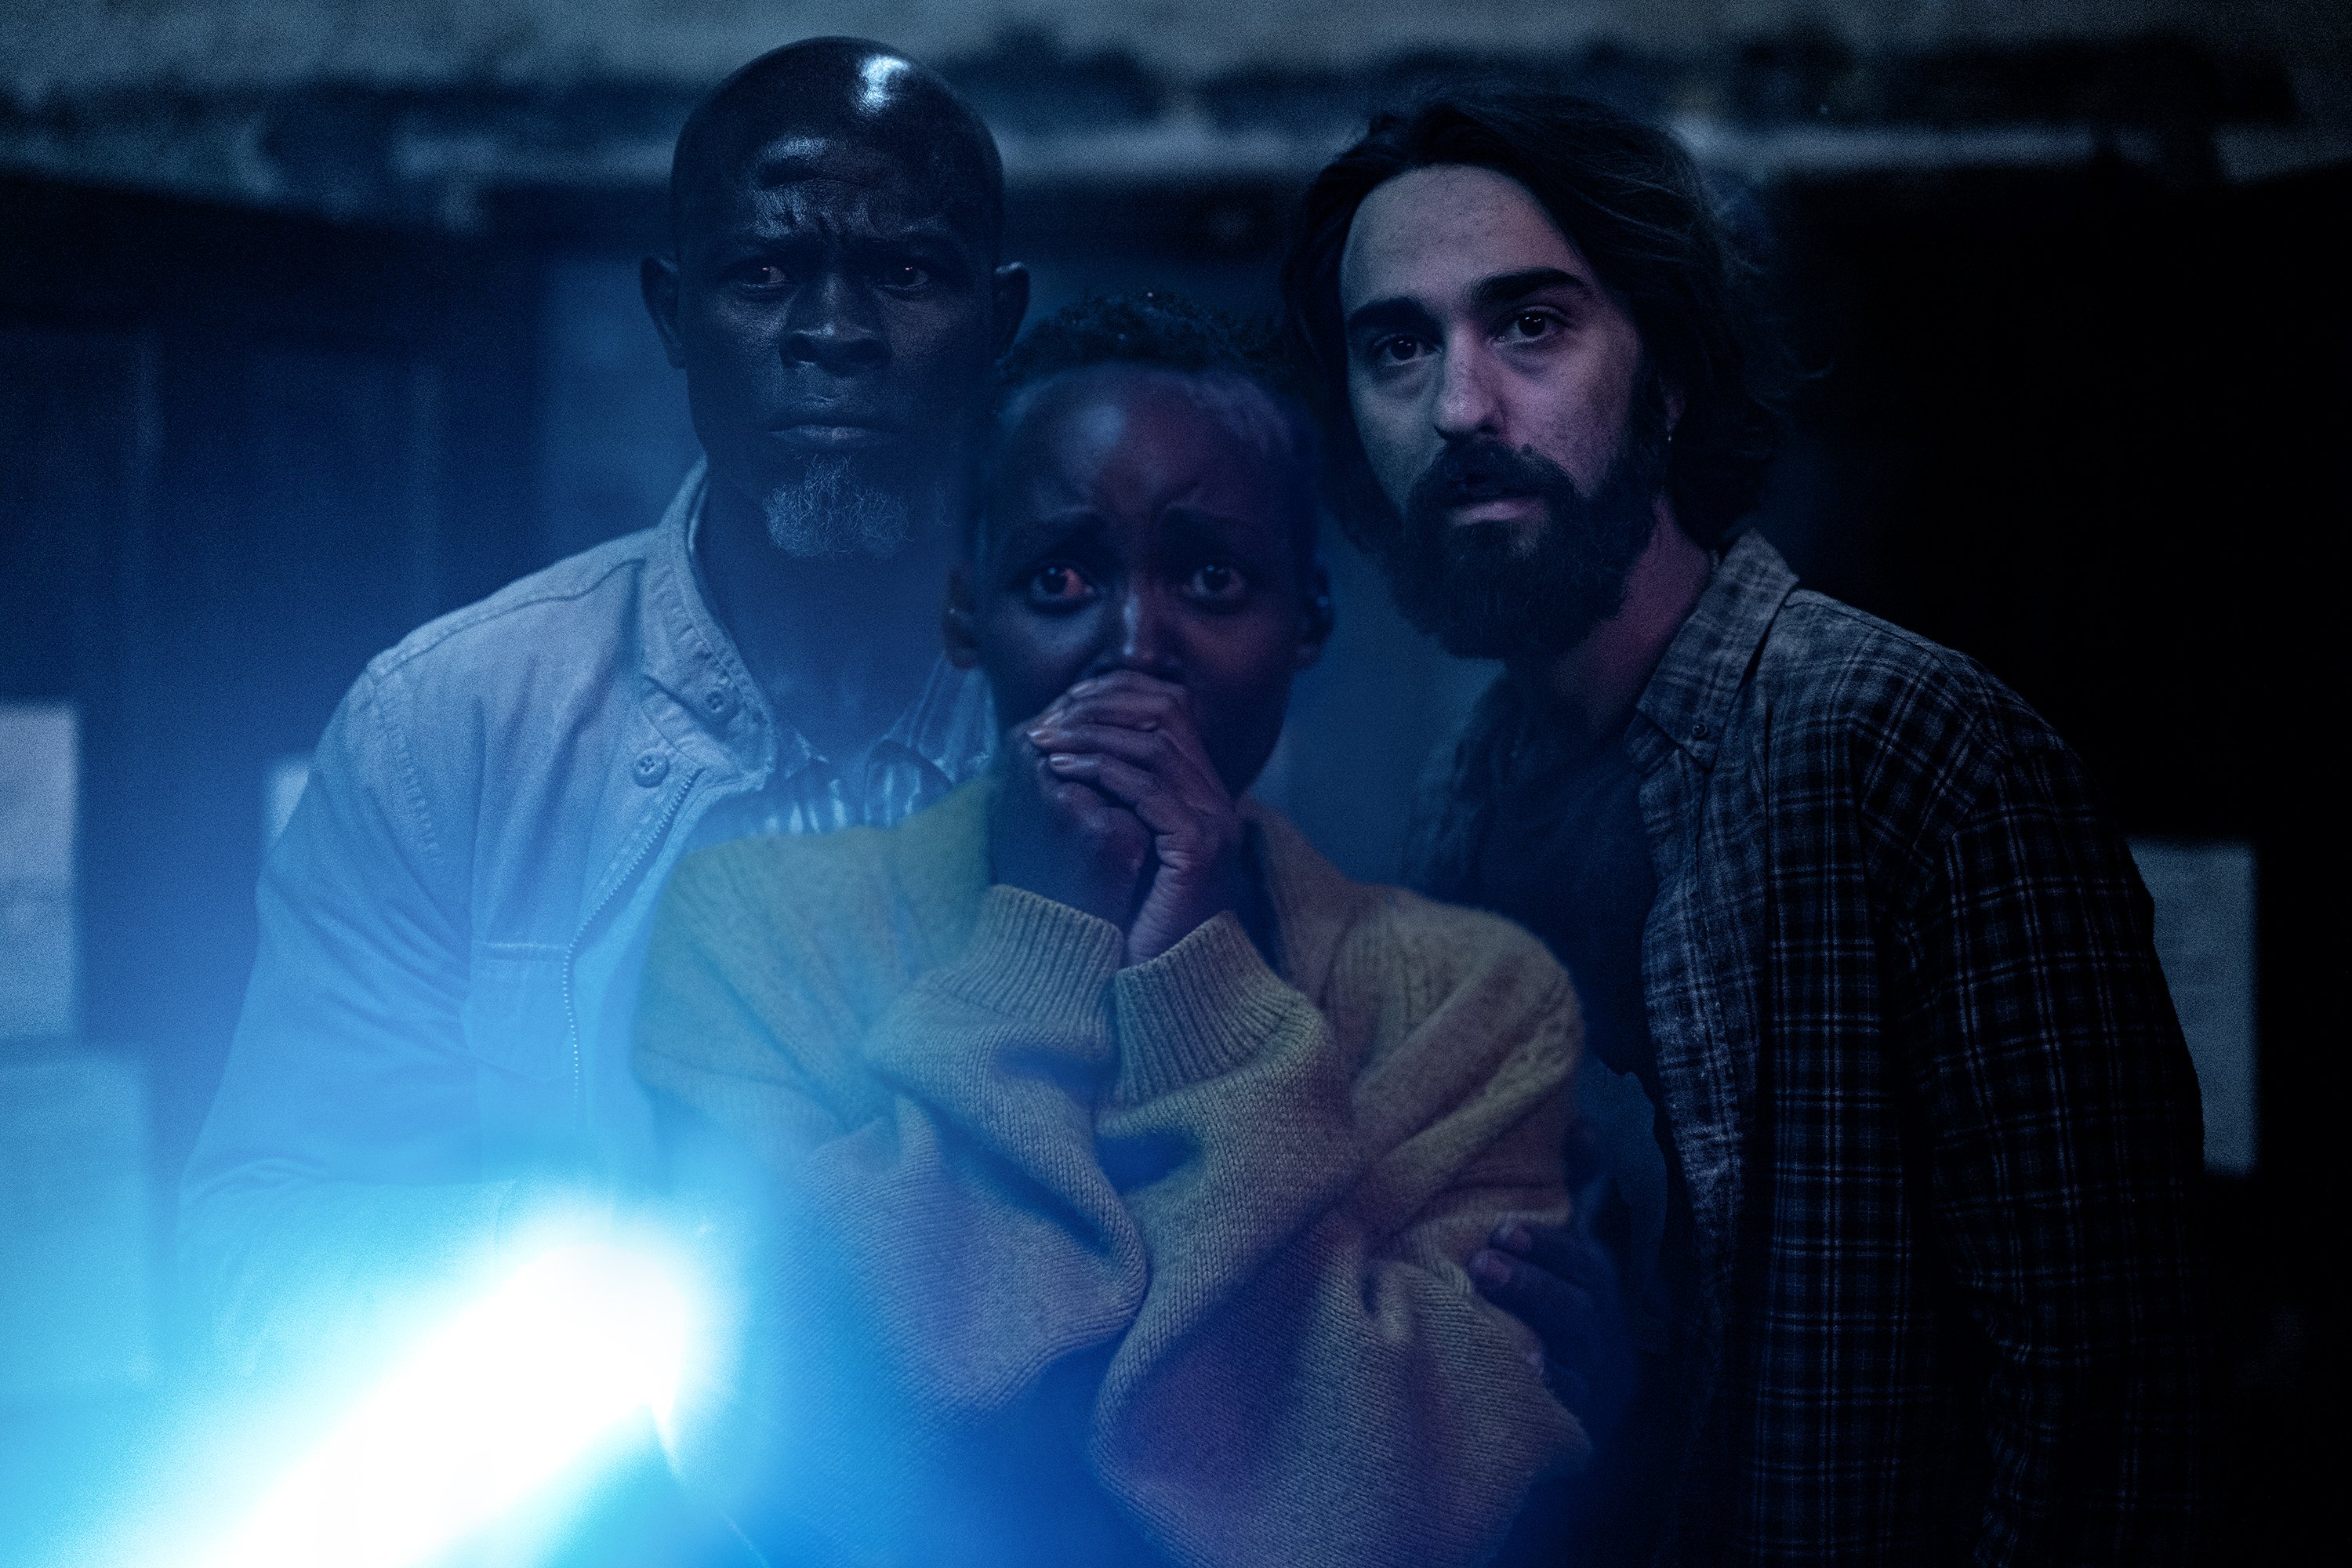 Djimon Hounsou as “Henri”, Lupita Nyong’o as “Samira” and Alex Wolff as “Reuben” in A Quiet Place: Day One from Paramount Pictures.